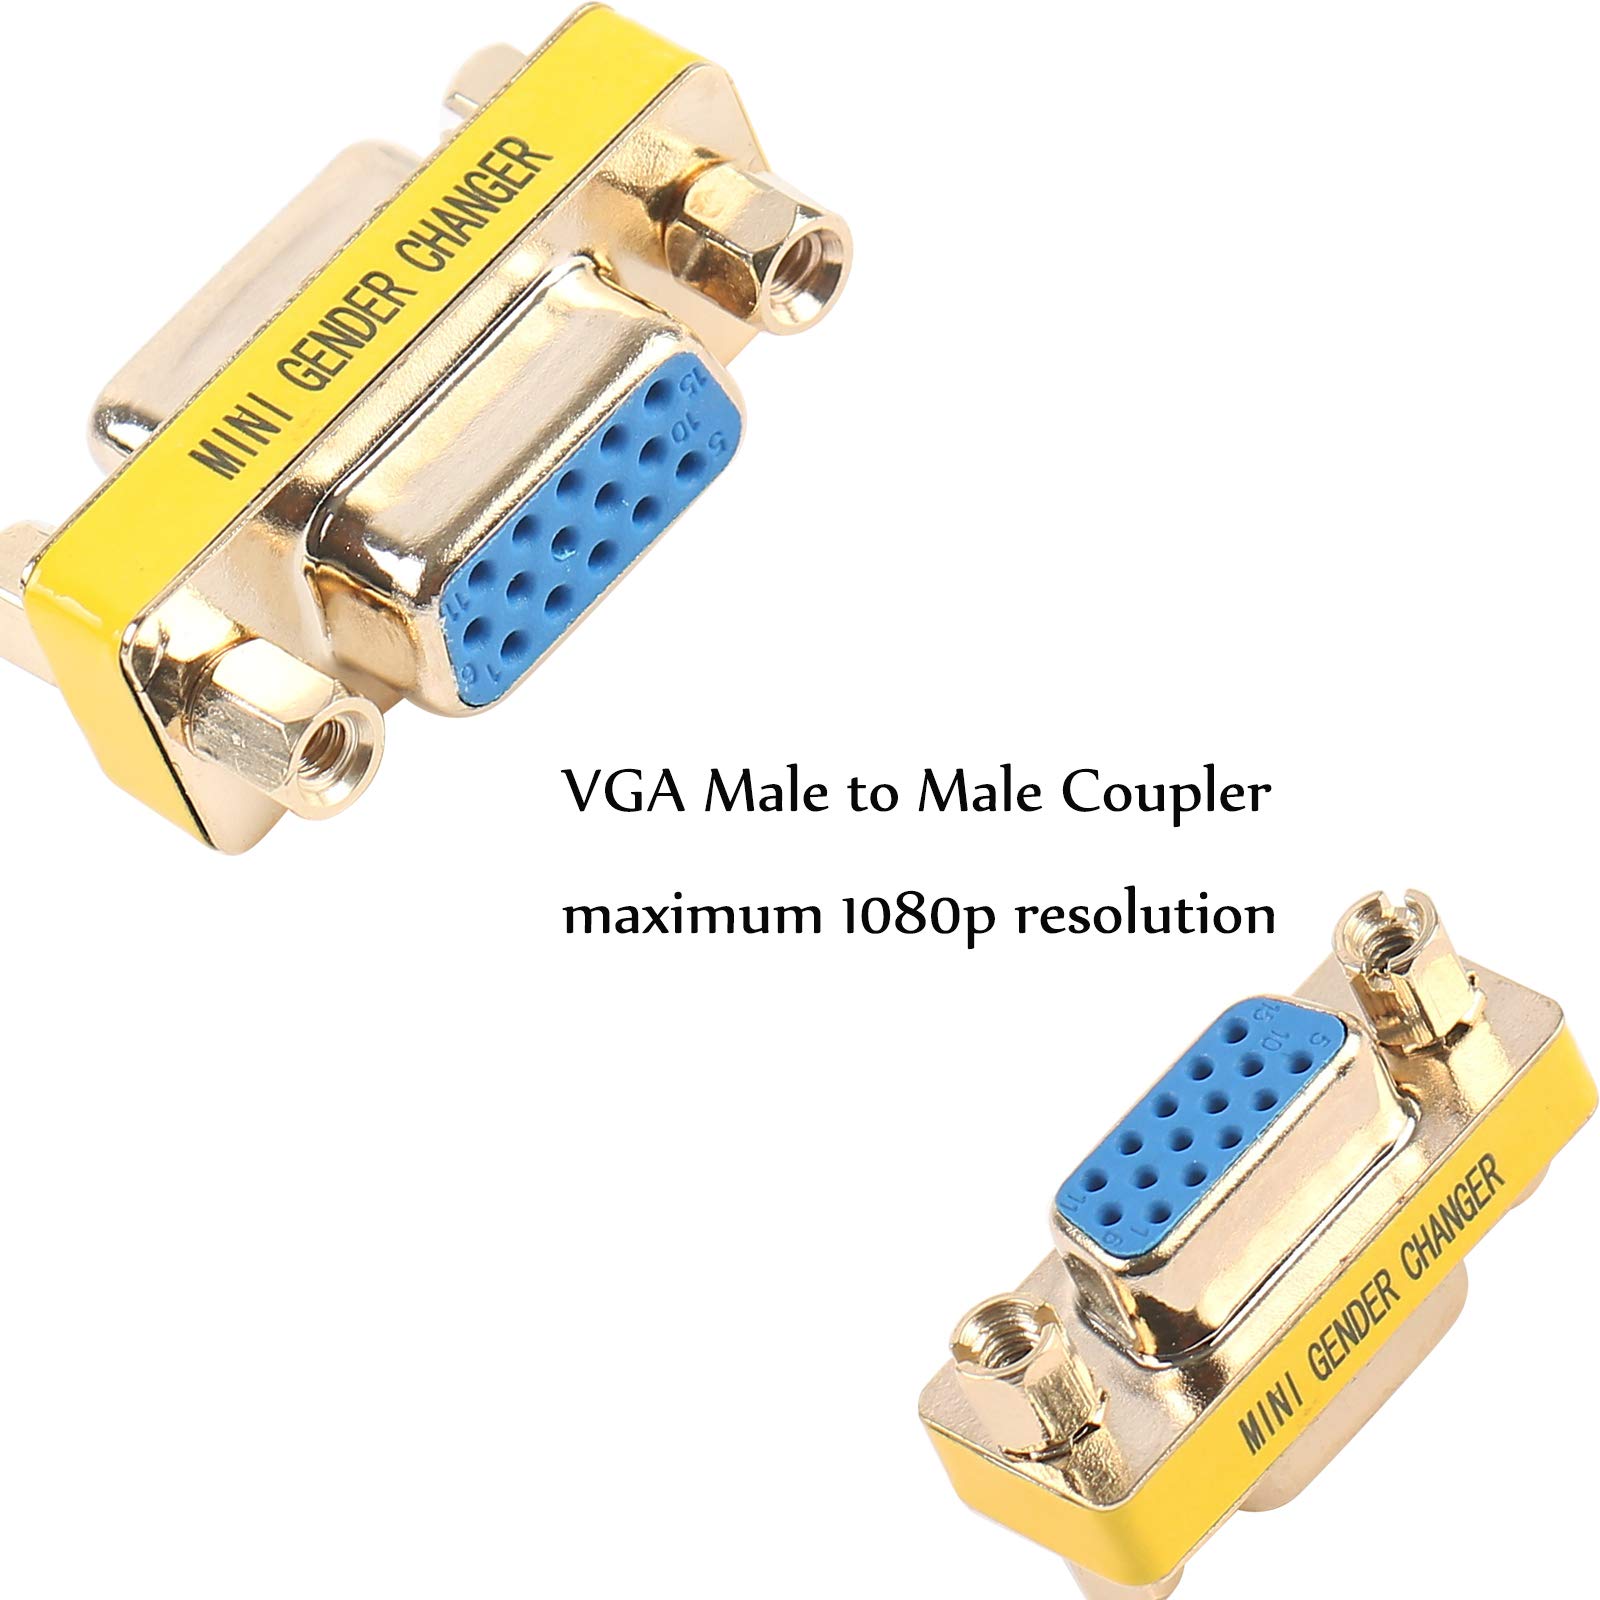 BENFEI VGA Coupler, 2-Pack VGA/SVGA Adapter HD15 Female to Female Gender with Gold-Plated Cord